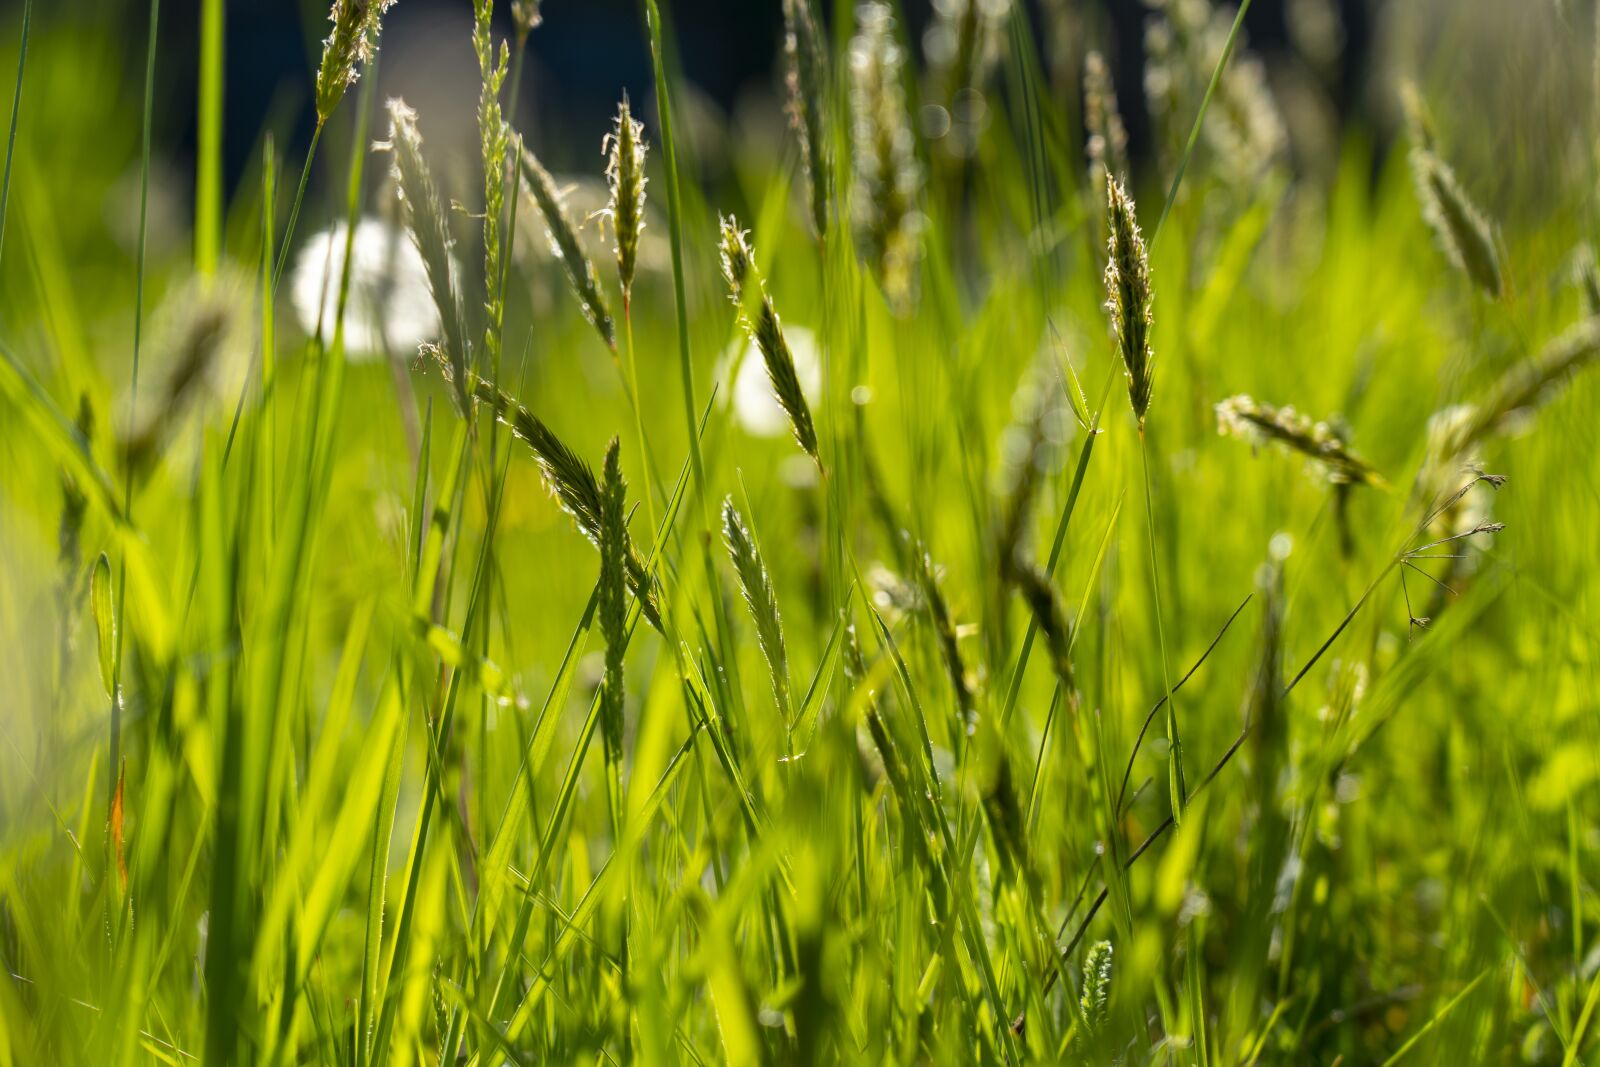 Sony a7 III sample photo. Grass, stalks, nature photography